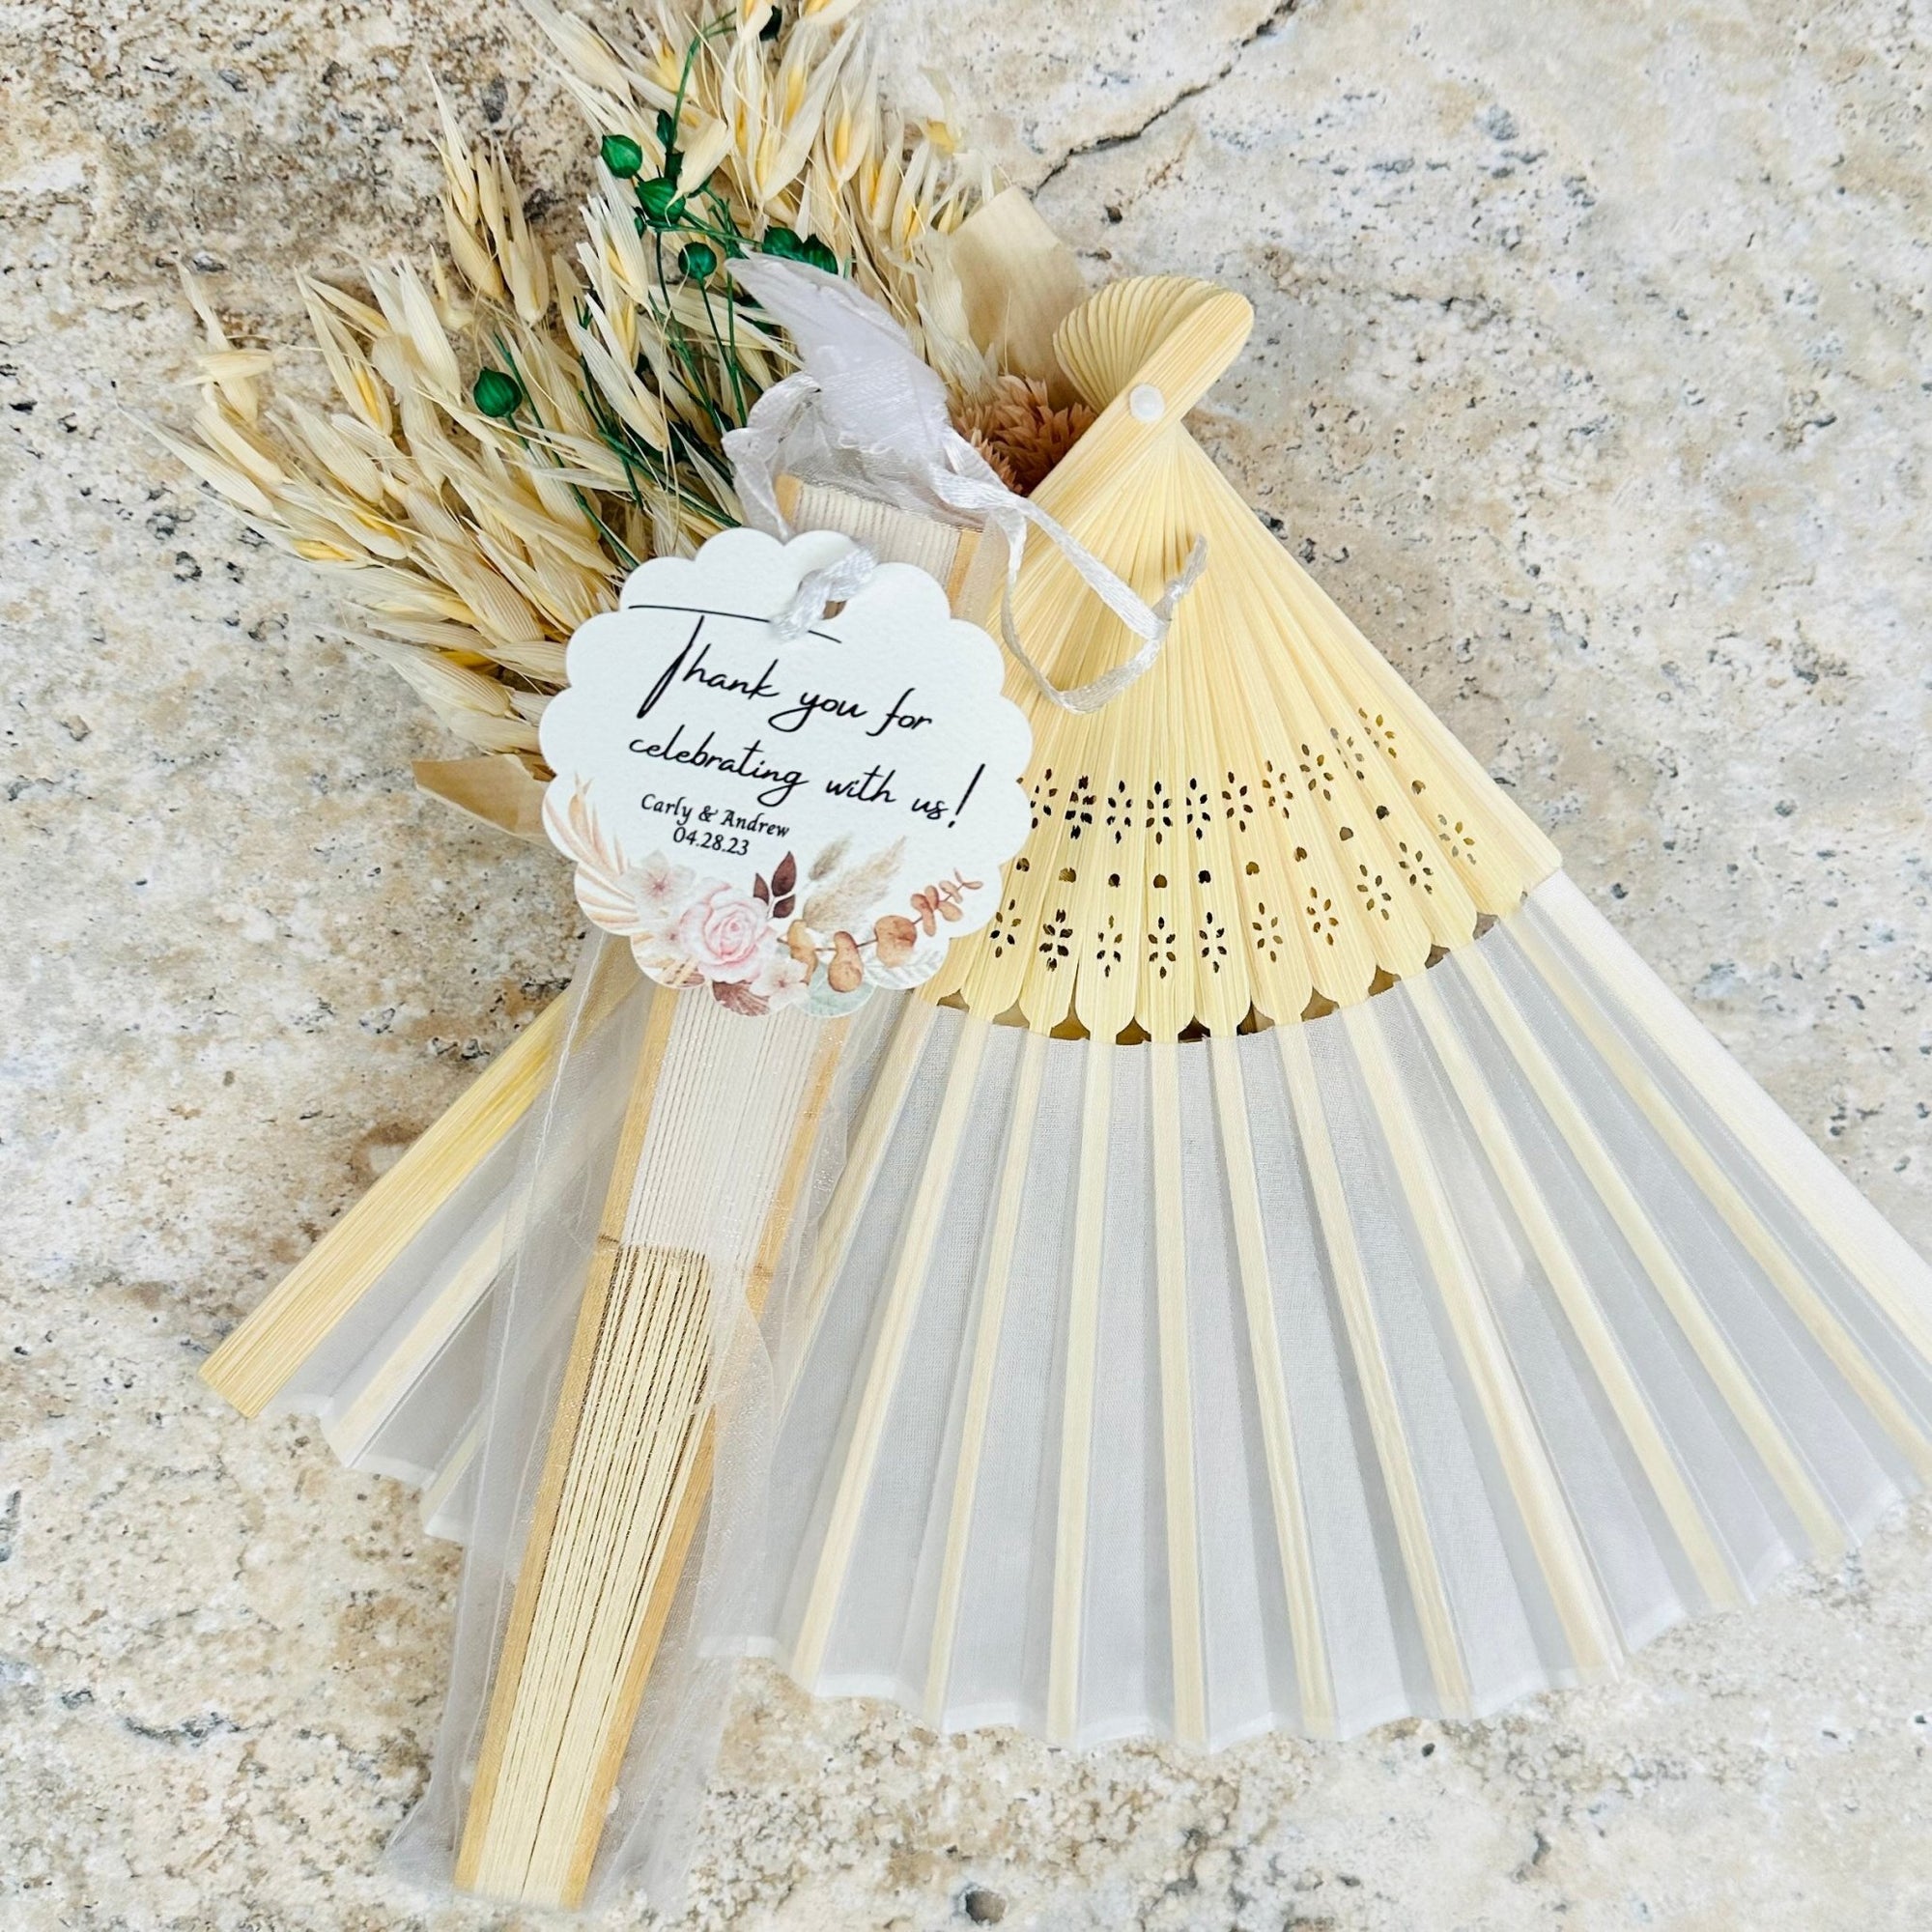 50pcs Personalized Paper Fans for Wedding Favors Custom Party Hand Fans for  Guests Bulk Bamboo Folding Fan Handheld for Women Bridesmaid Bachelor